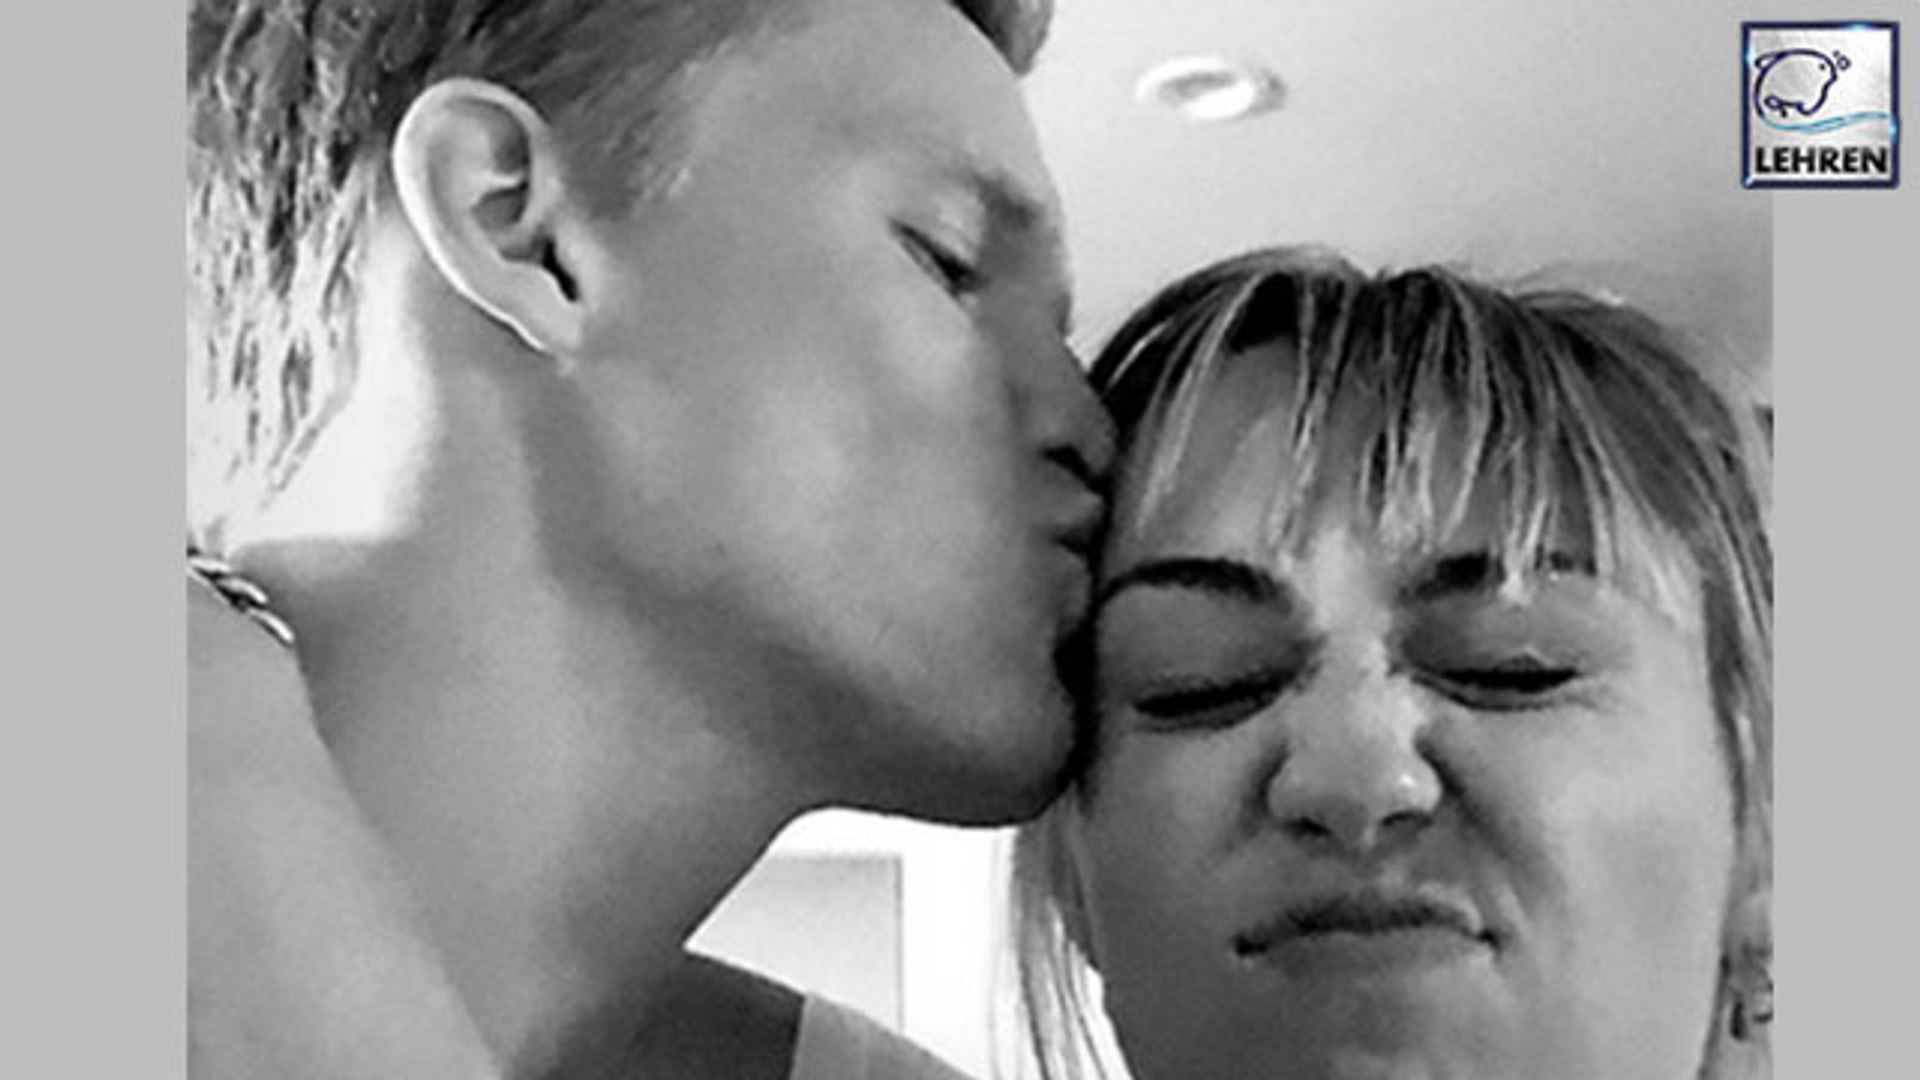 Cody Simpson Opens Up About Rumours of Split With Miley Cyrus!